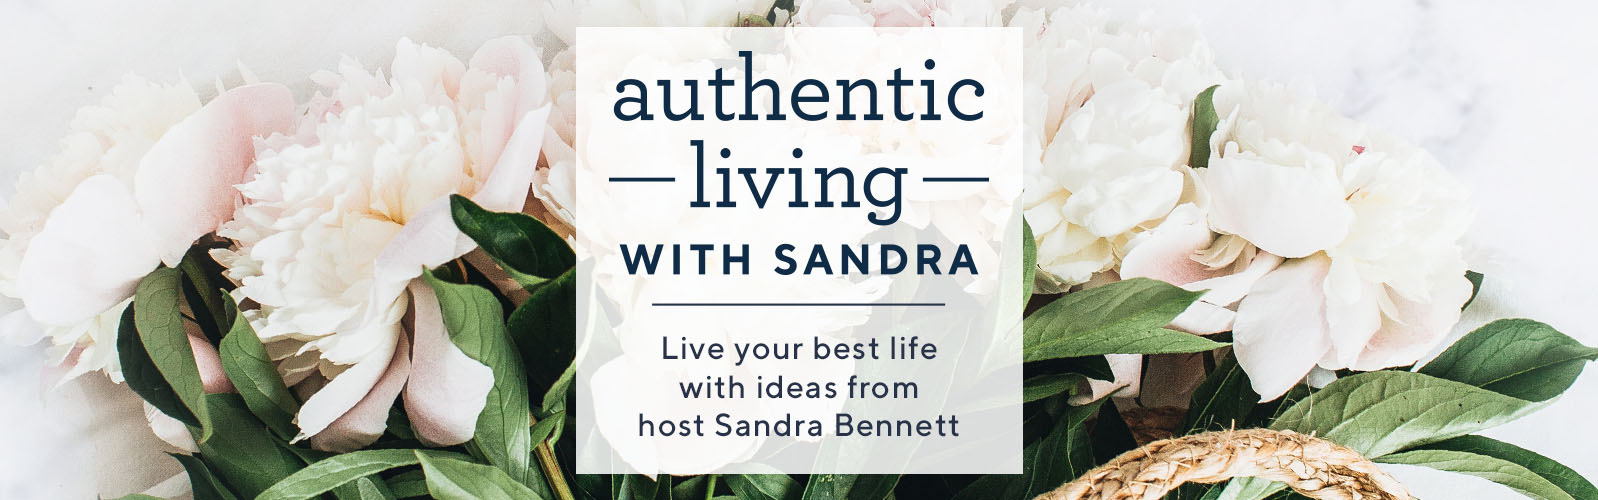 Authentic Living with Sandra.  Live your best life with ideas from host Sandra Bennett.